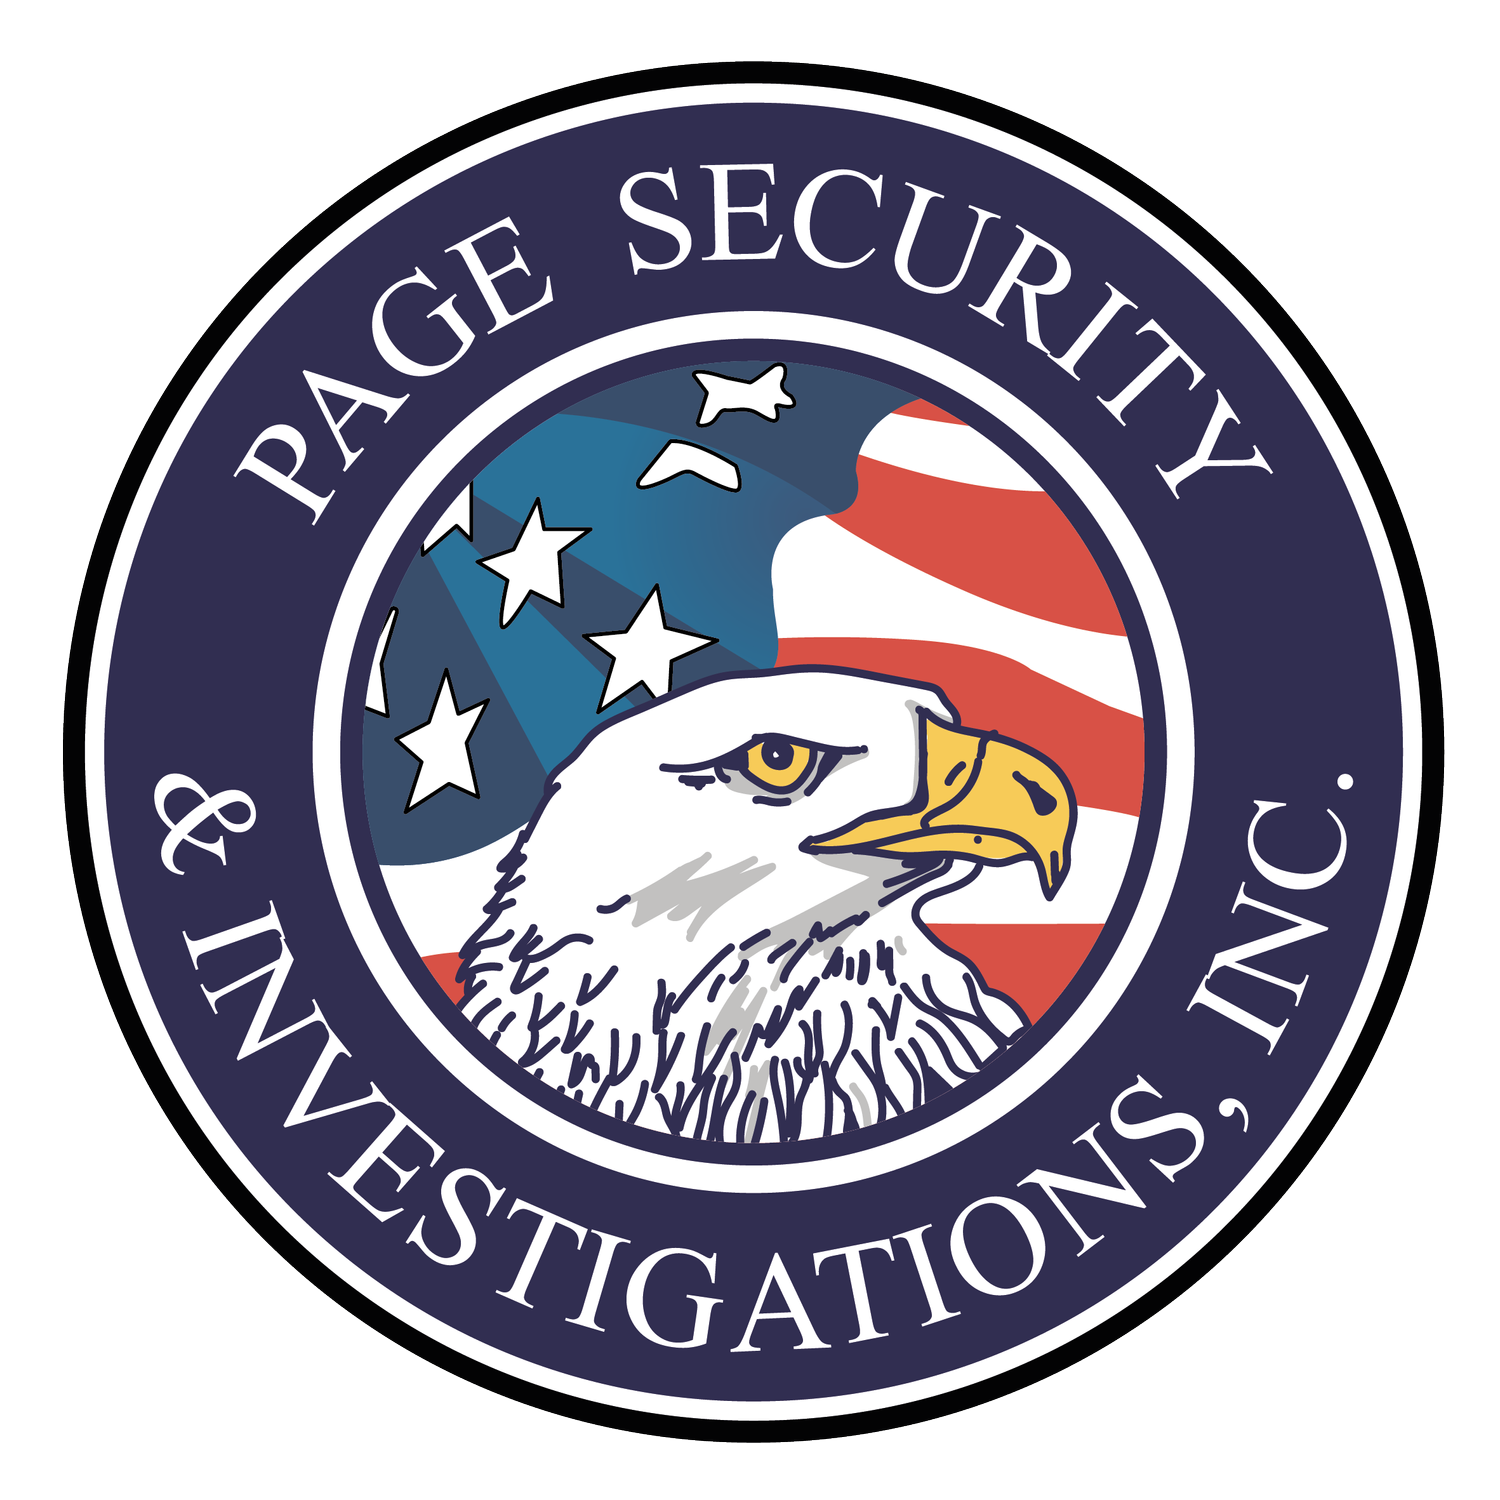 Page Security &amp; Investigations, Inc. | Investigative Services | Background &amp; Screenings